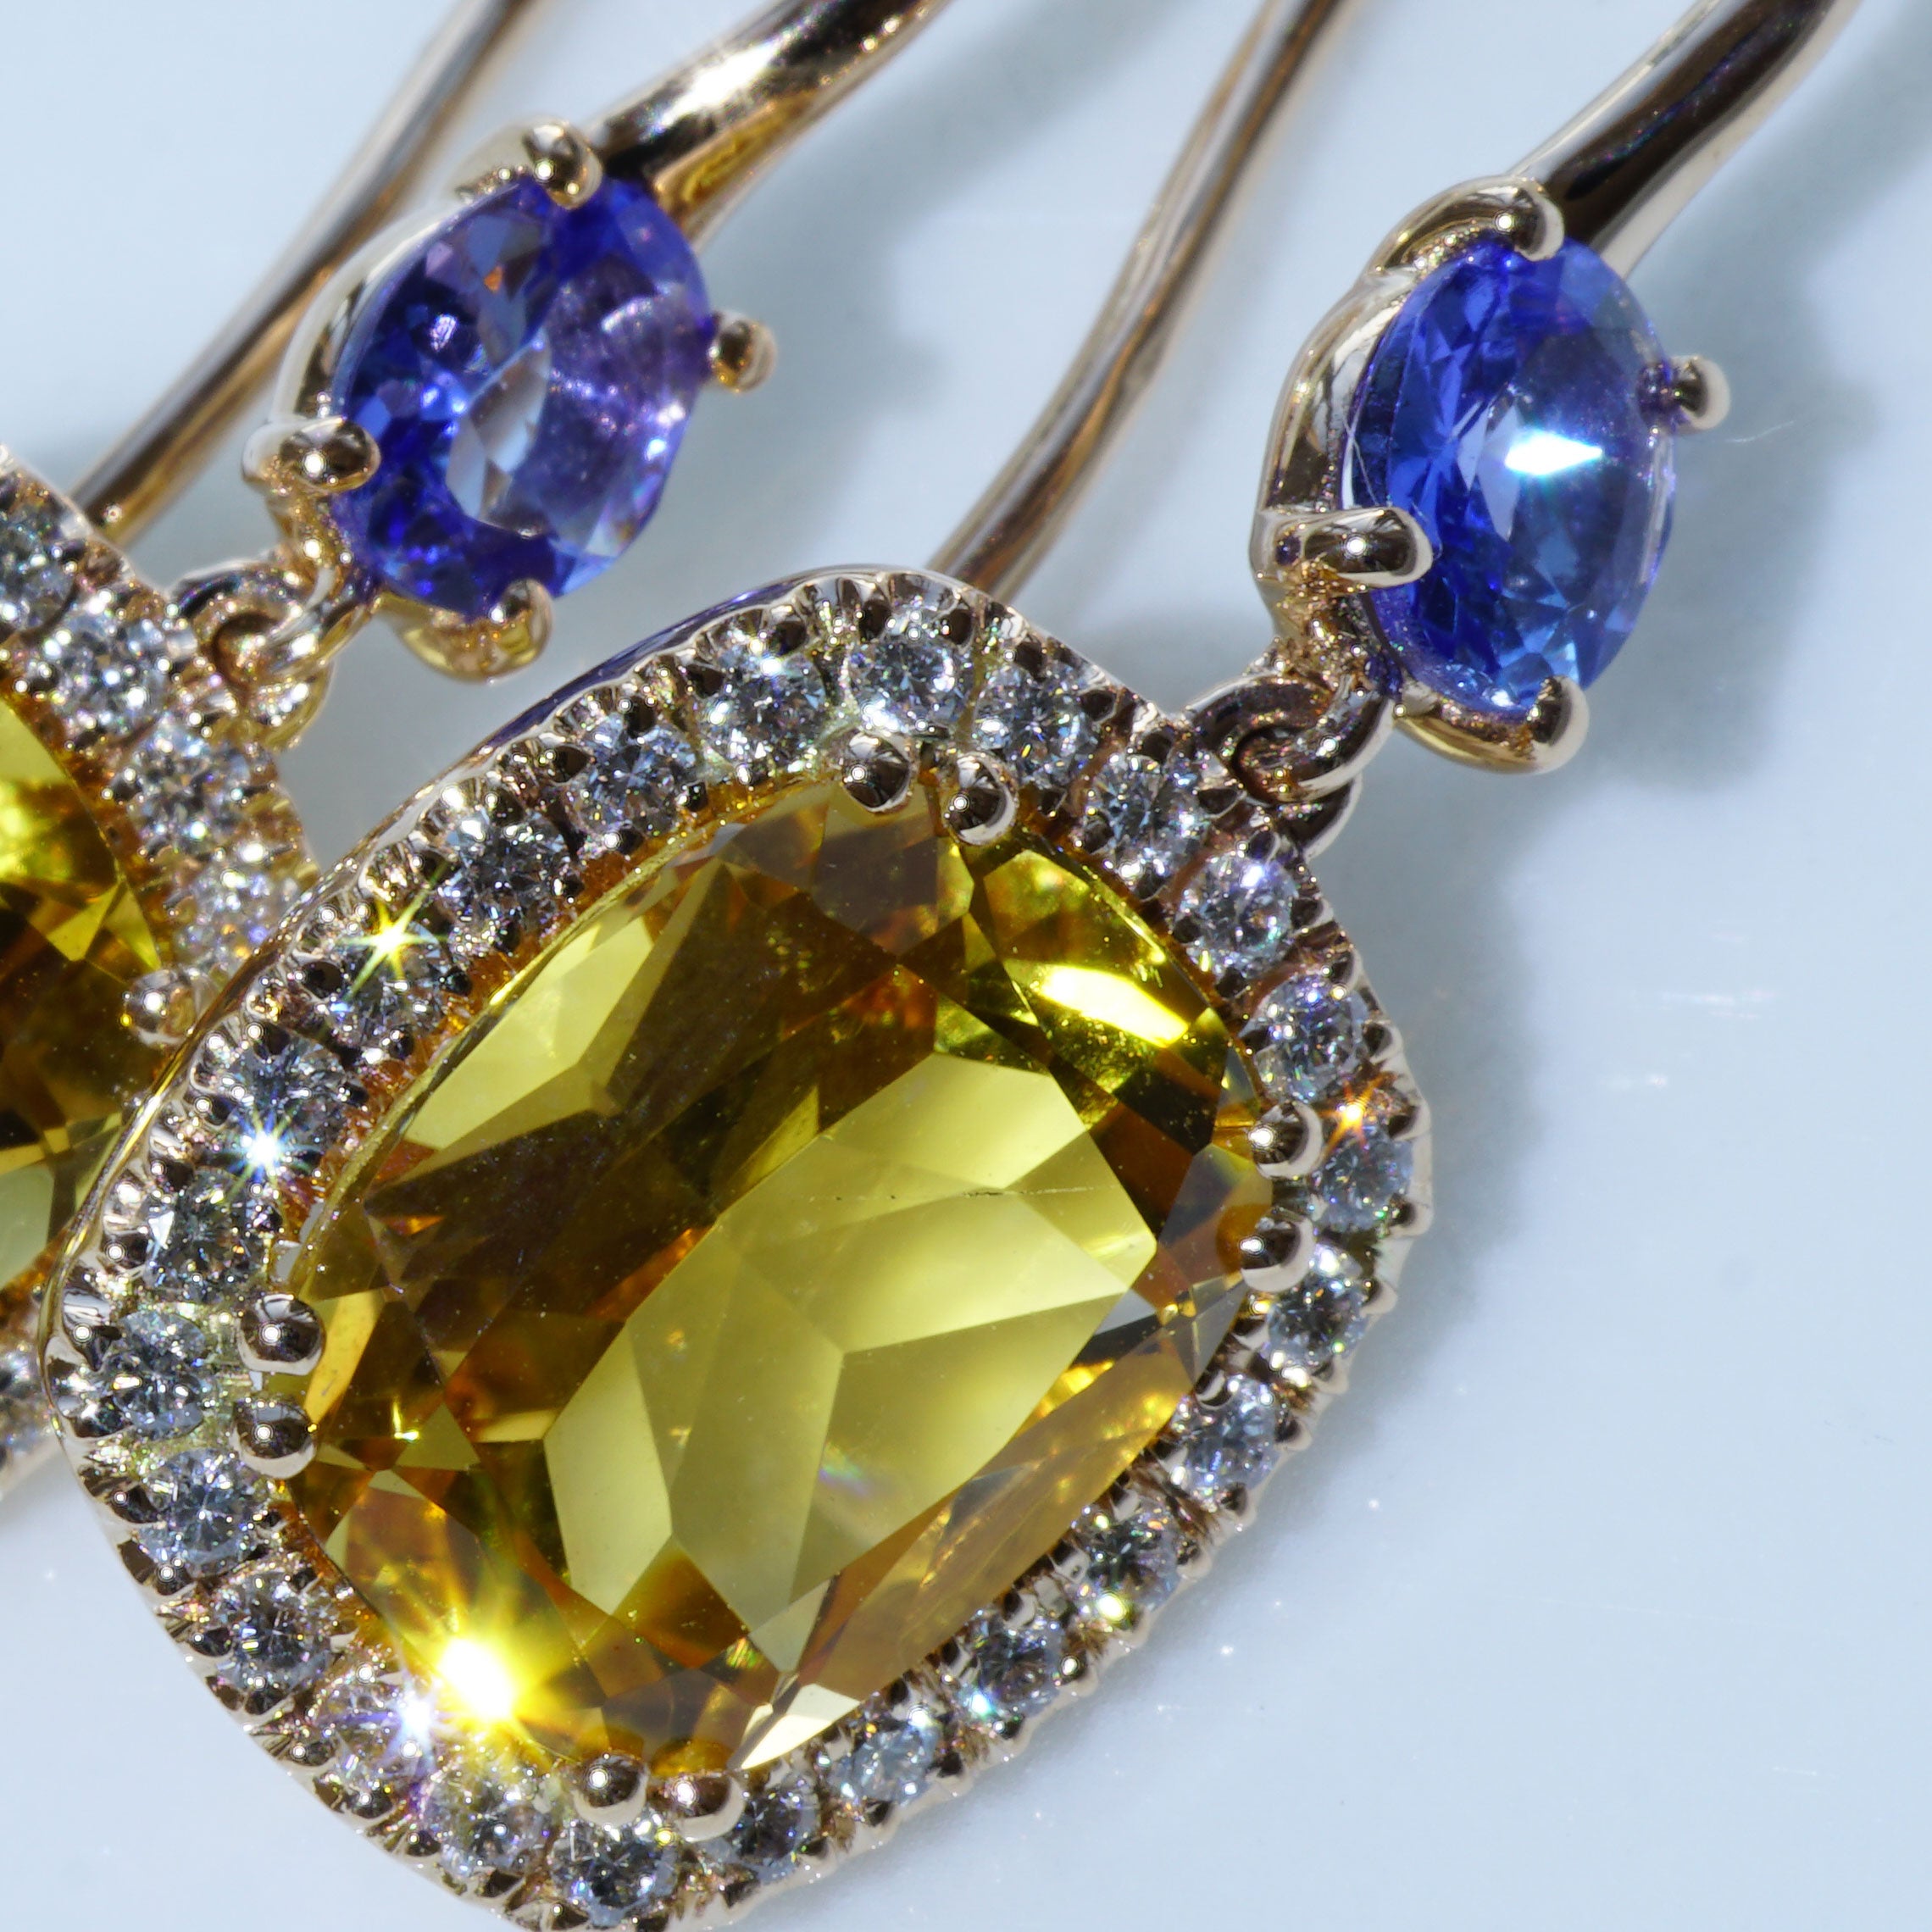 Earrings of high quality made in a traditional Italian goldsmith in Valenza, modern design, two oval gold-colored citrines total approx. 5.25 ct and two blue-violet oval faceted tanzanites 0.63 ct, AAA+, bright color qualities, full cut brilliants